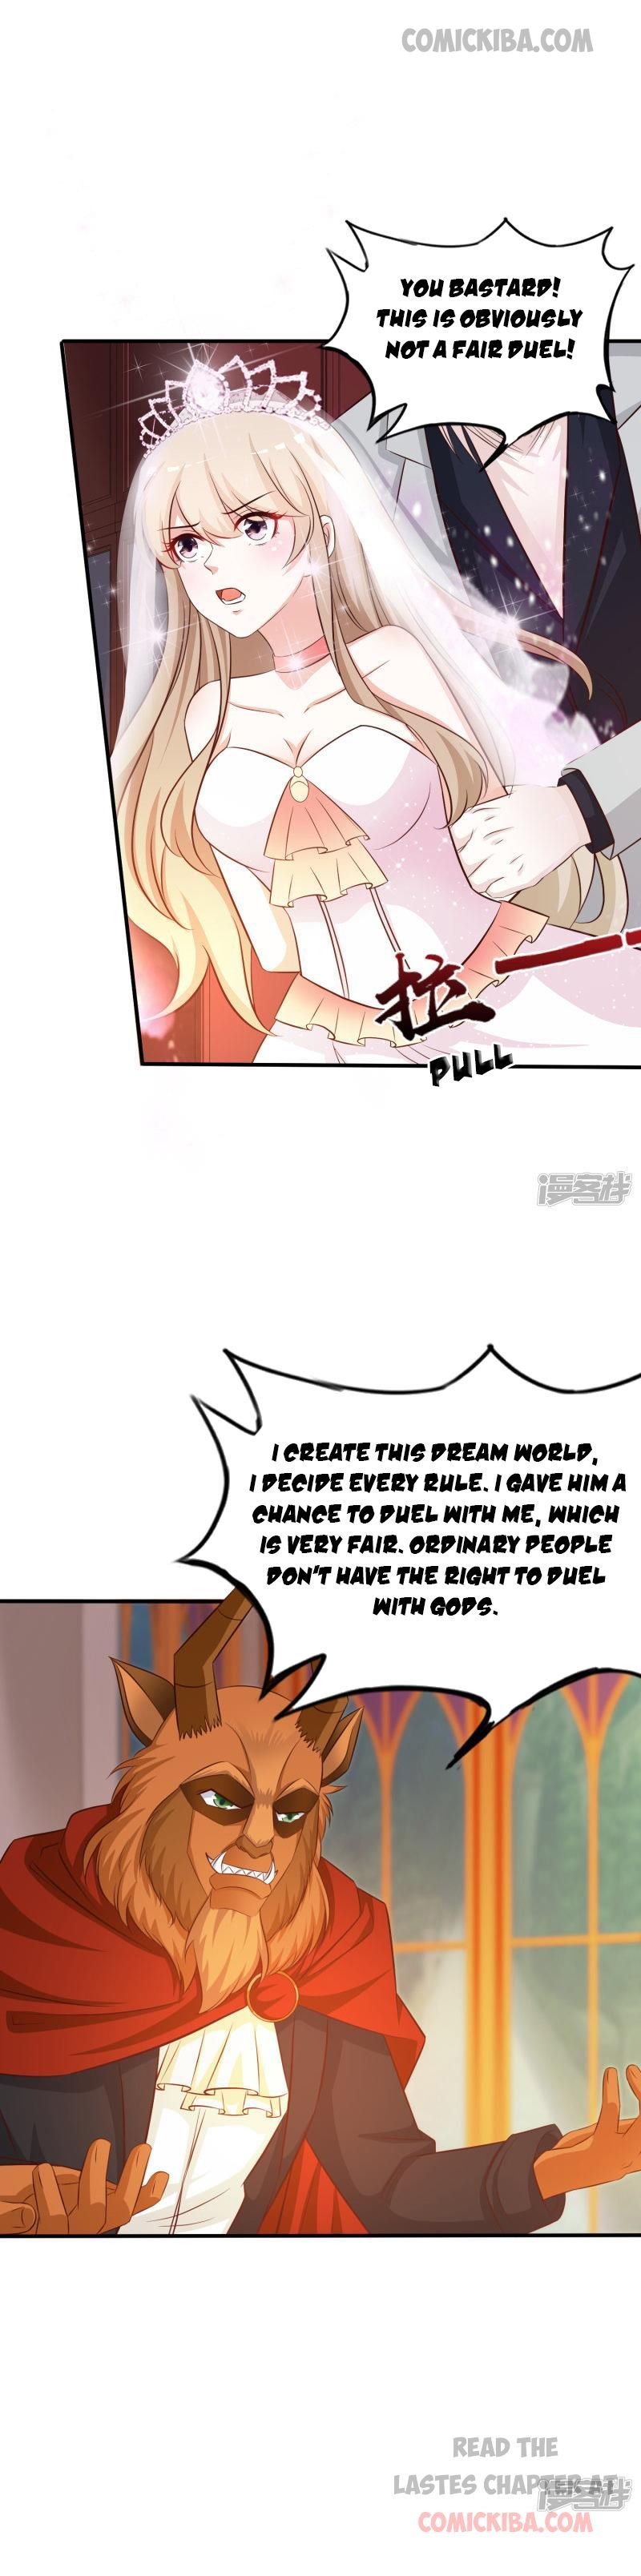 The Strongest Peach Blossom - Page 2